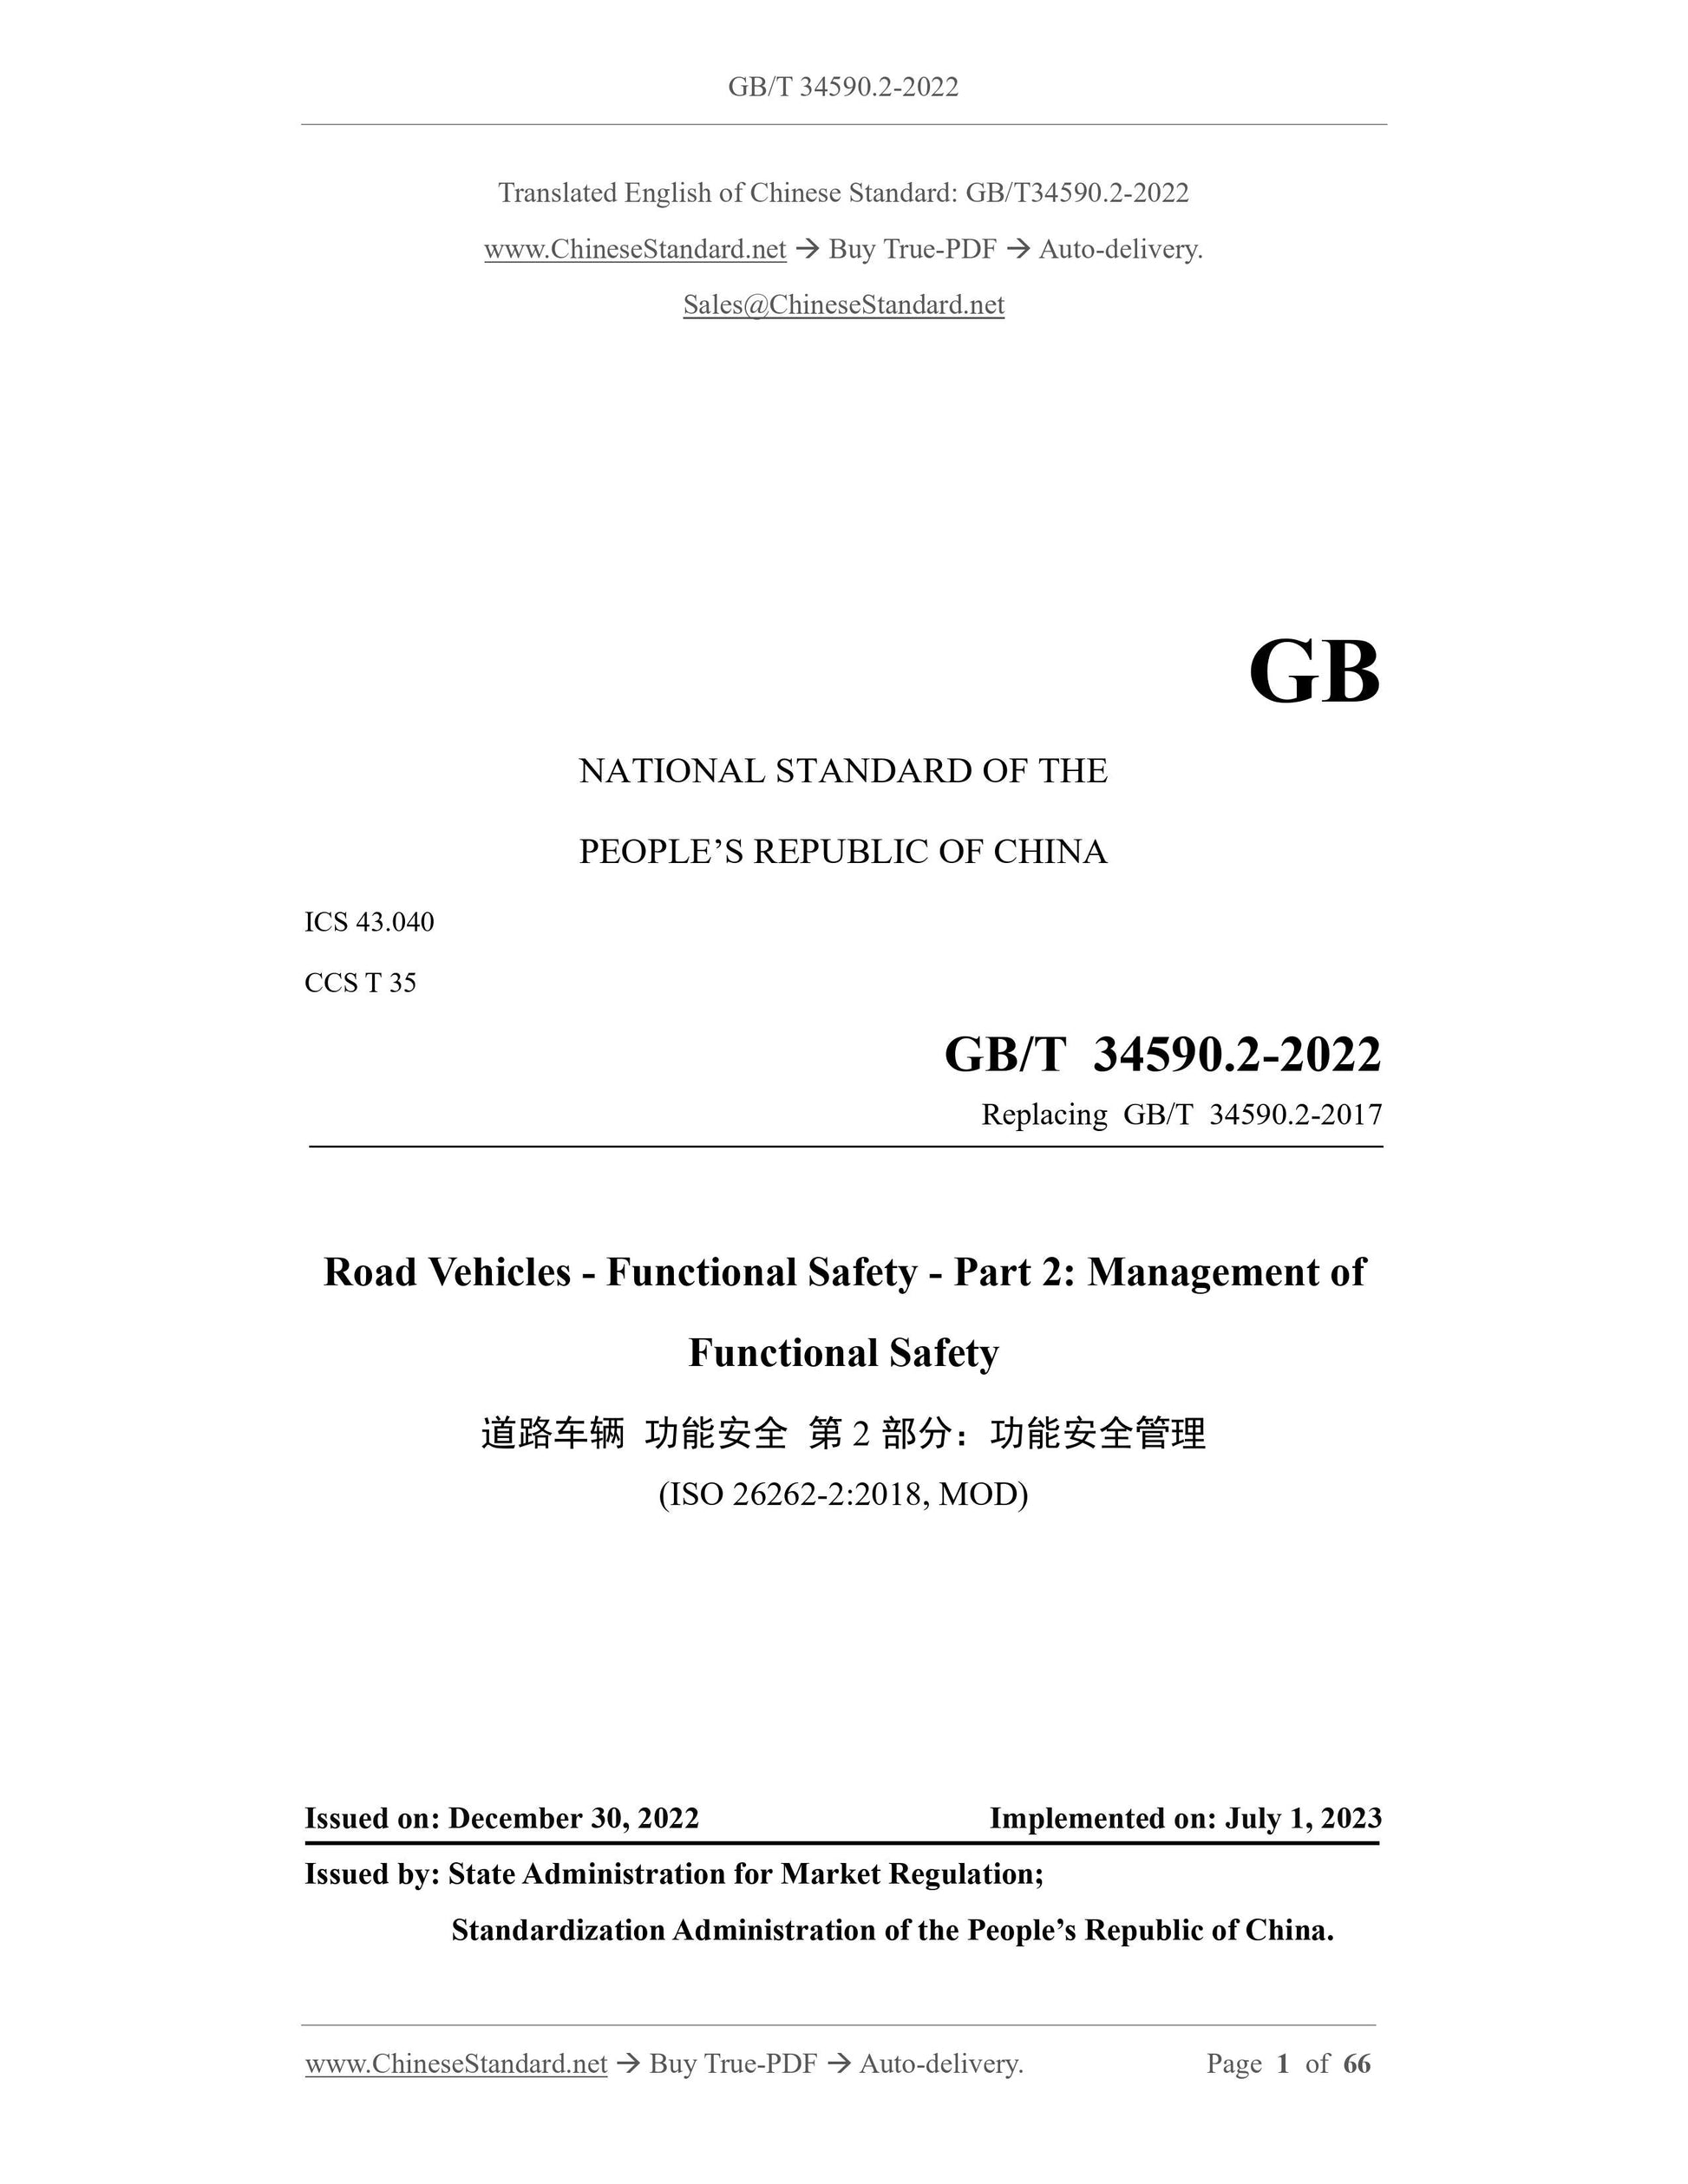 GB/T 34590.2-2022 Page 1